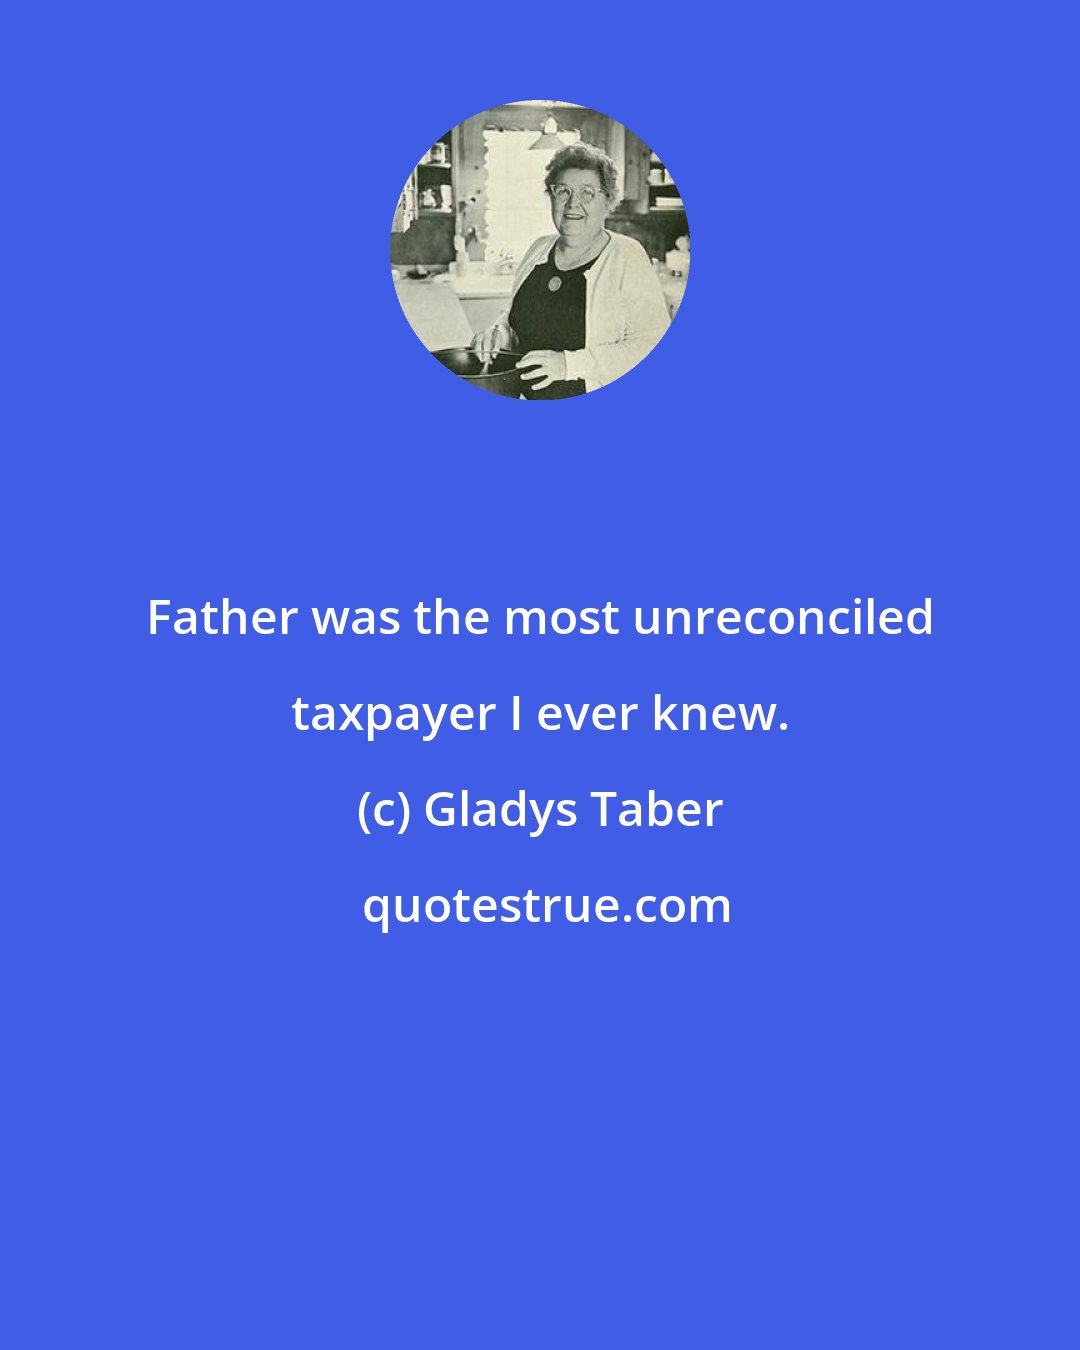 Gladys Taber: Father was the most unreconciled taxpayer I ever knew.